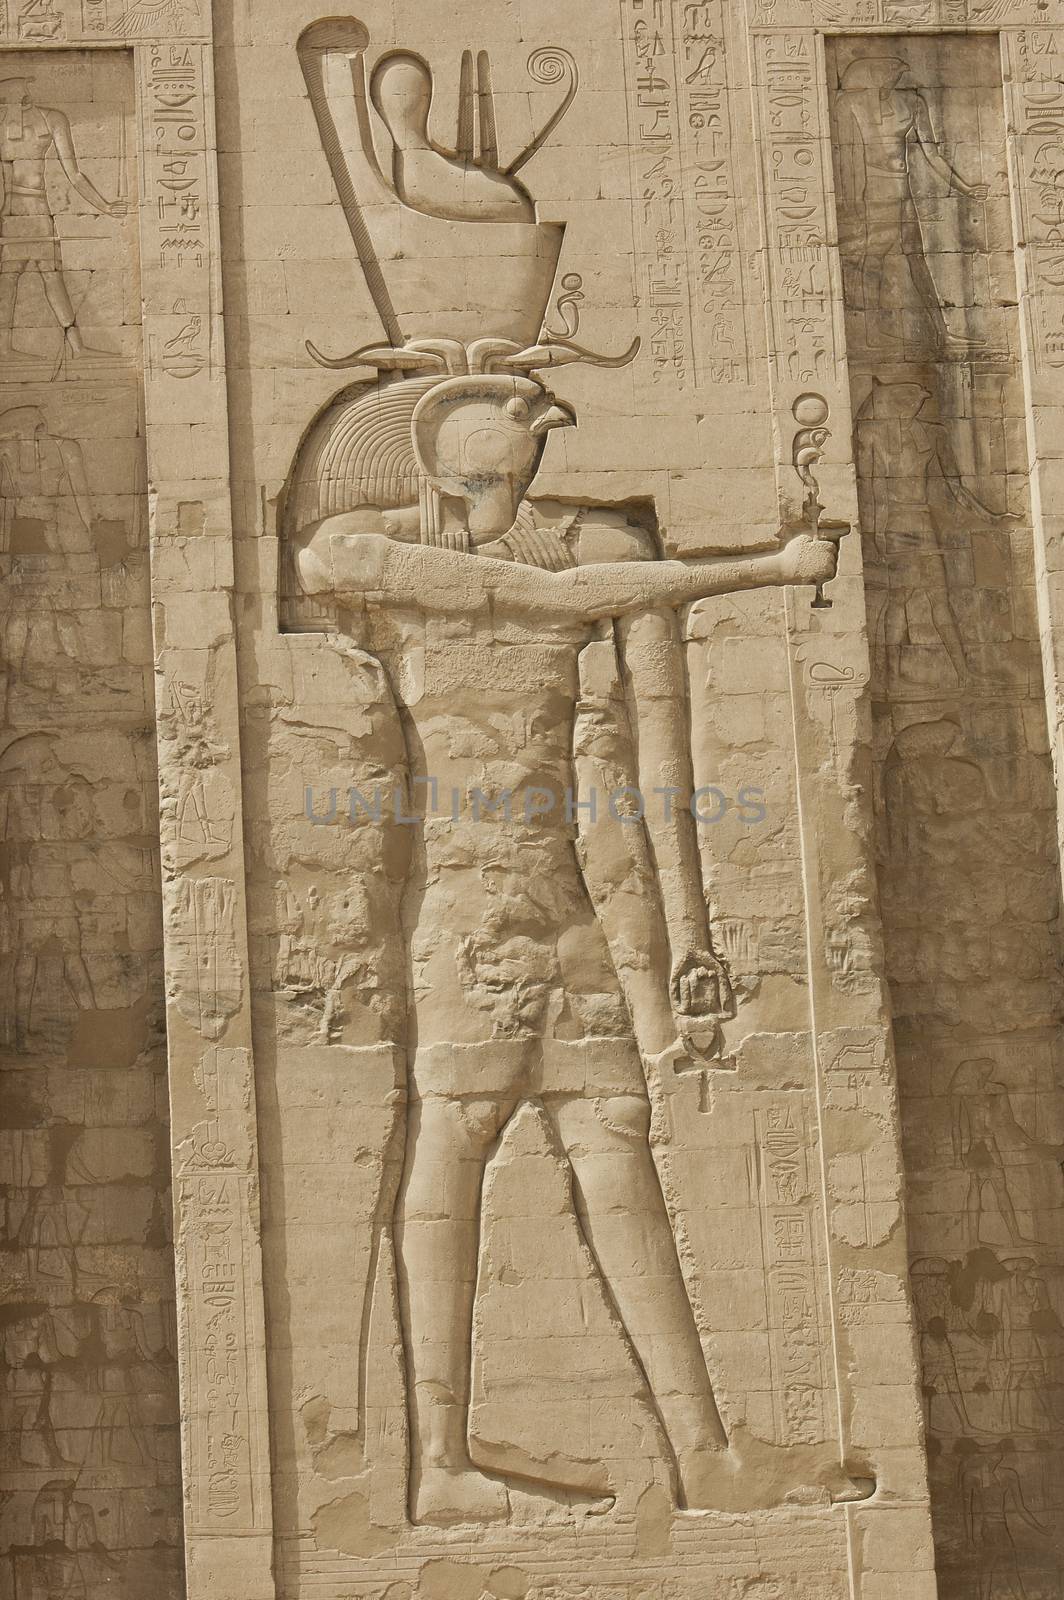 Egyptian hieroglyphic carvings on a wall at the Temple of Edfu